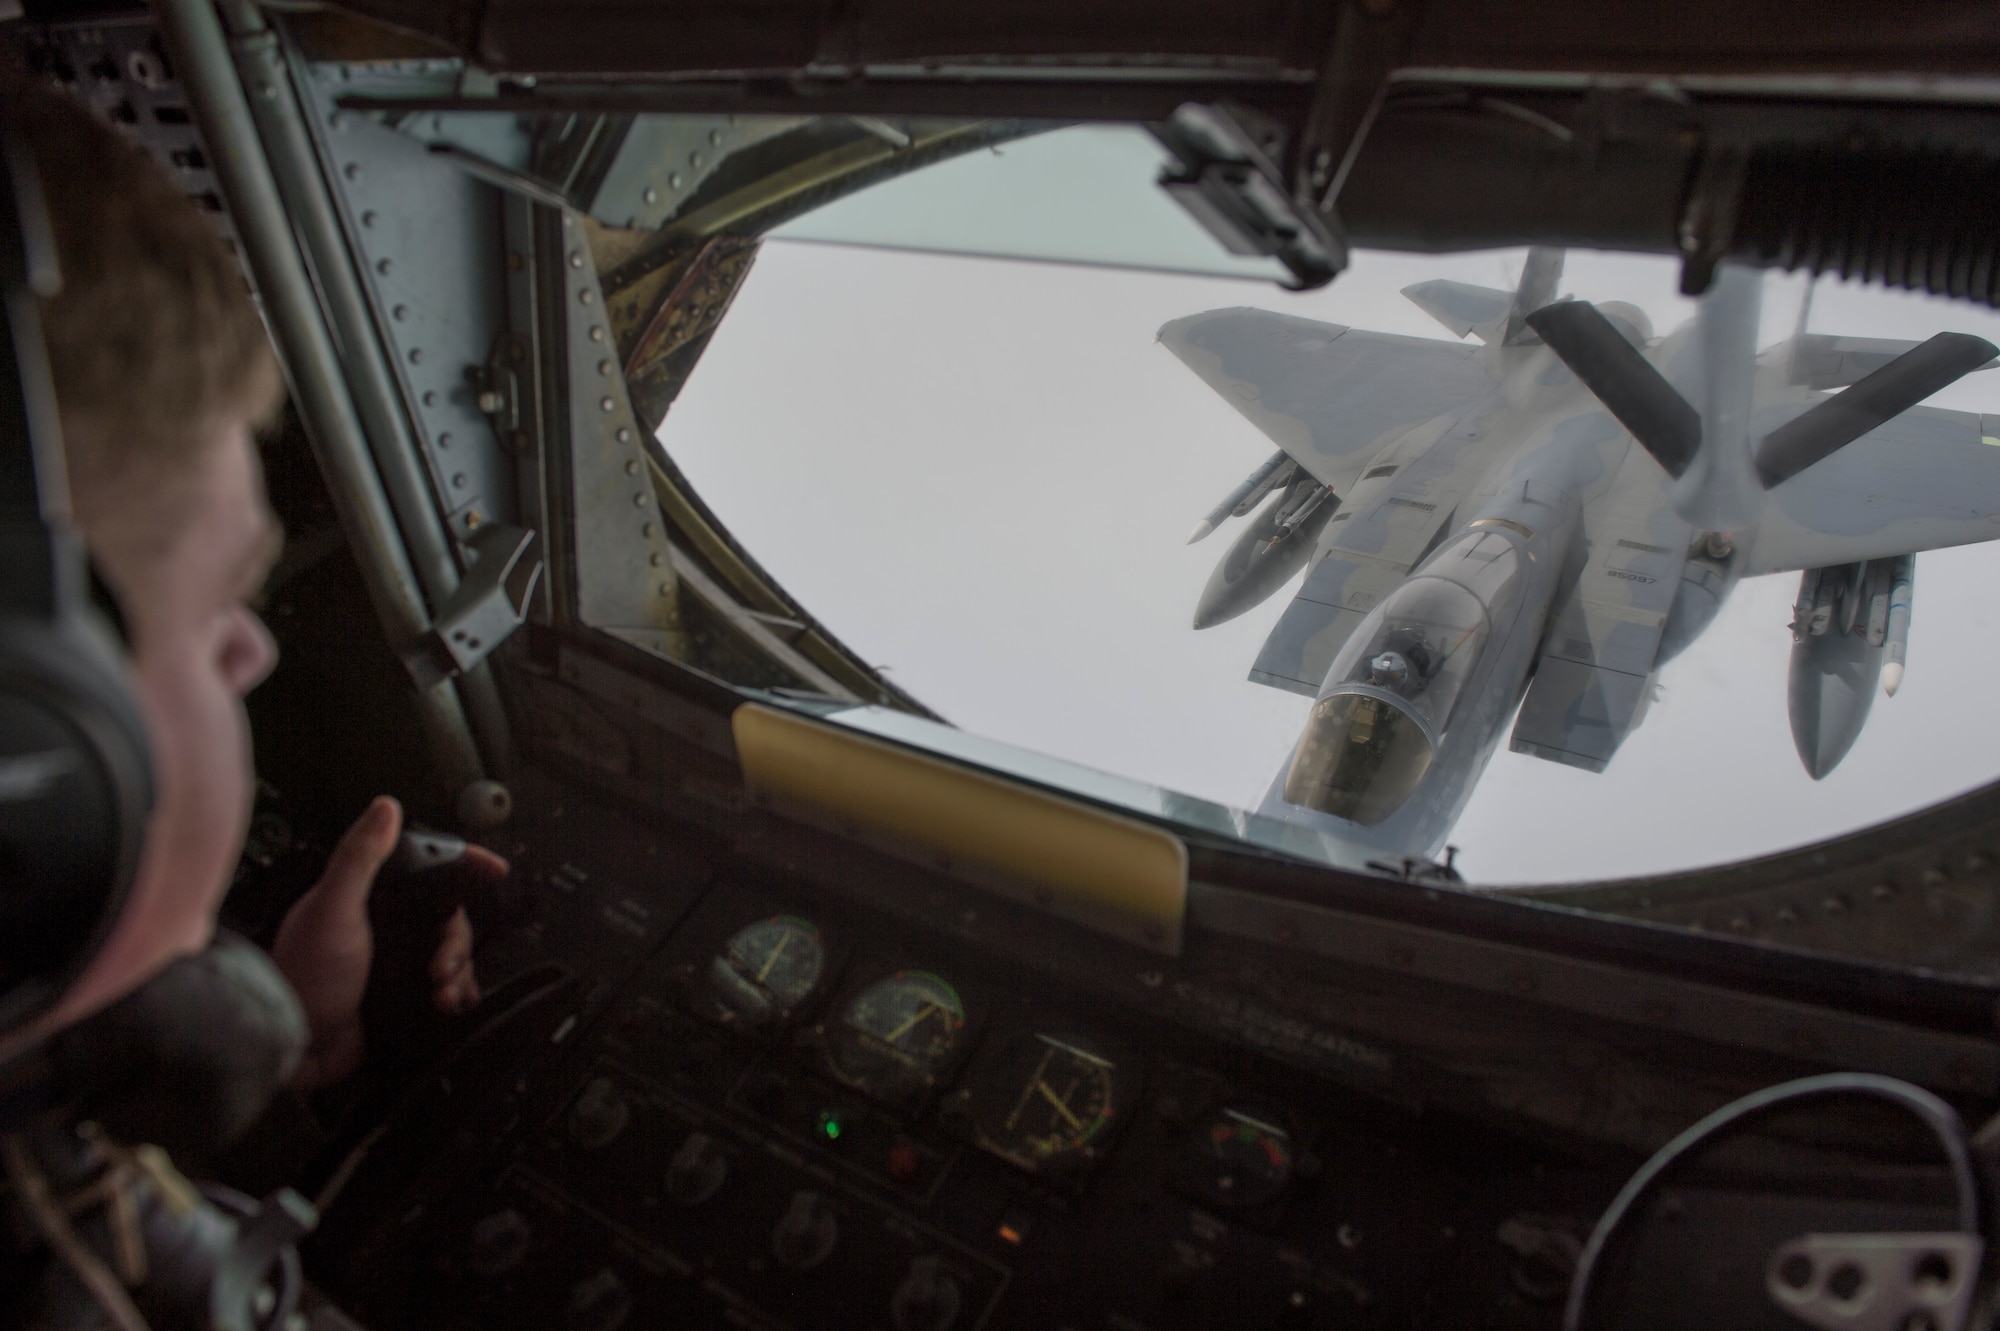 U.S. Air Force Technical Sargent Michael Voorhees, with 909th Air Refueling Squadron, refuels an F-15C in support of Valiant Shield, on Sept 20, 2018. Valiant Shield is a U.S. only, biennial field training exercise (FTX) with a focus on integration of joint training in a blue-water environment among U.S. forces. This training enables real-world proficiency in sustaining joint forces through detecting, locating, tracking, and engaging units at sea, in the air, on land, and in cyberspace in response to a range of mission areas. (U.S. Navy photo Mass Communication Specialist 3rd Class Darienne Slack)